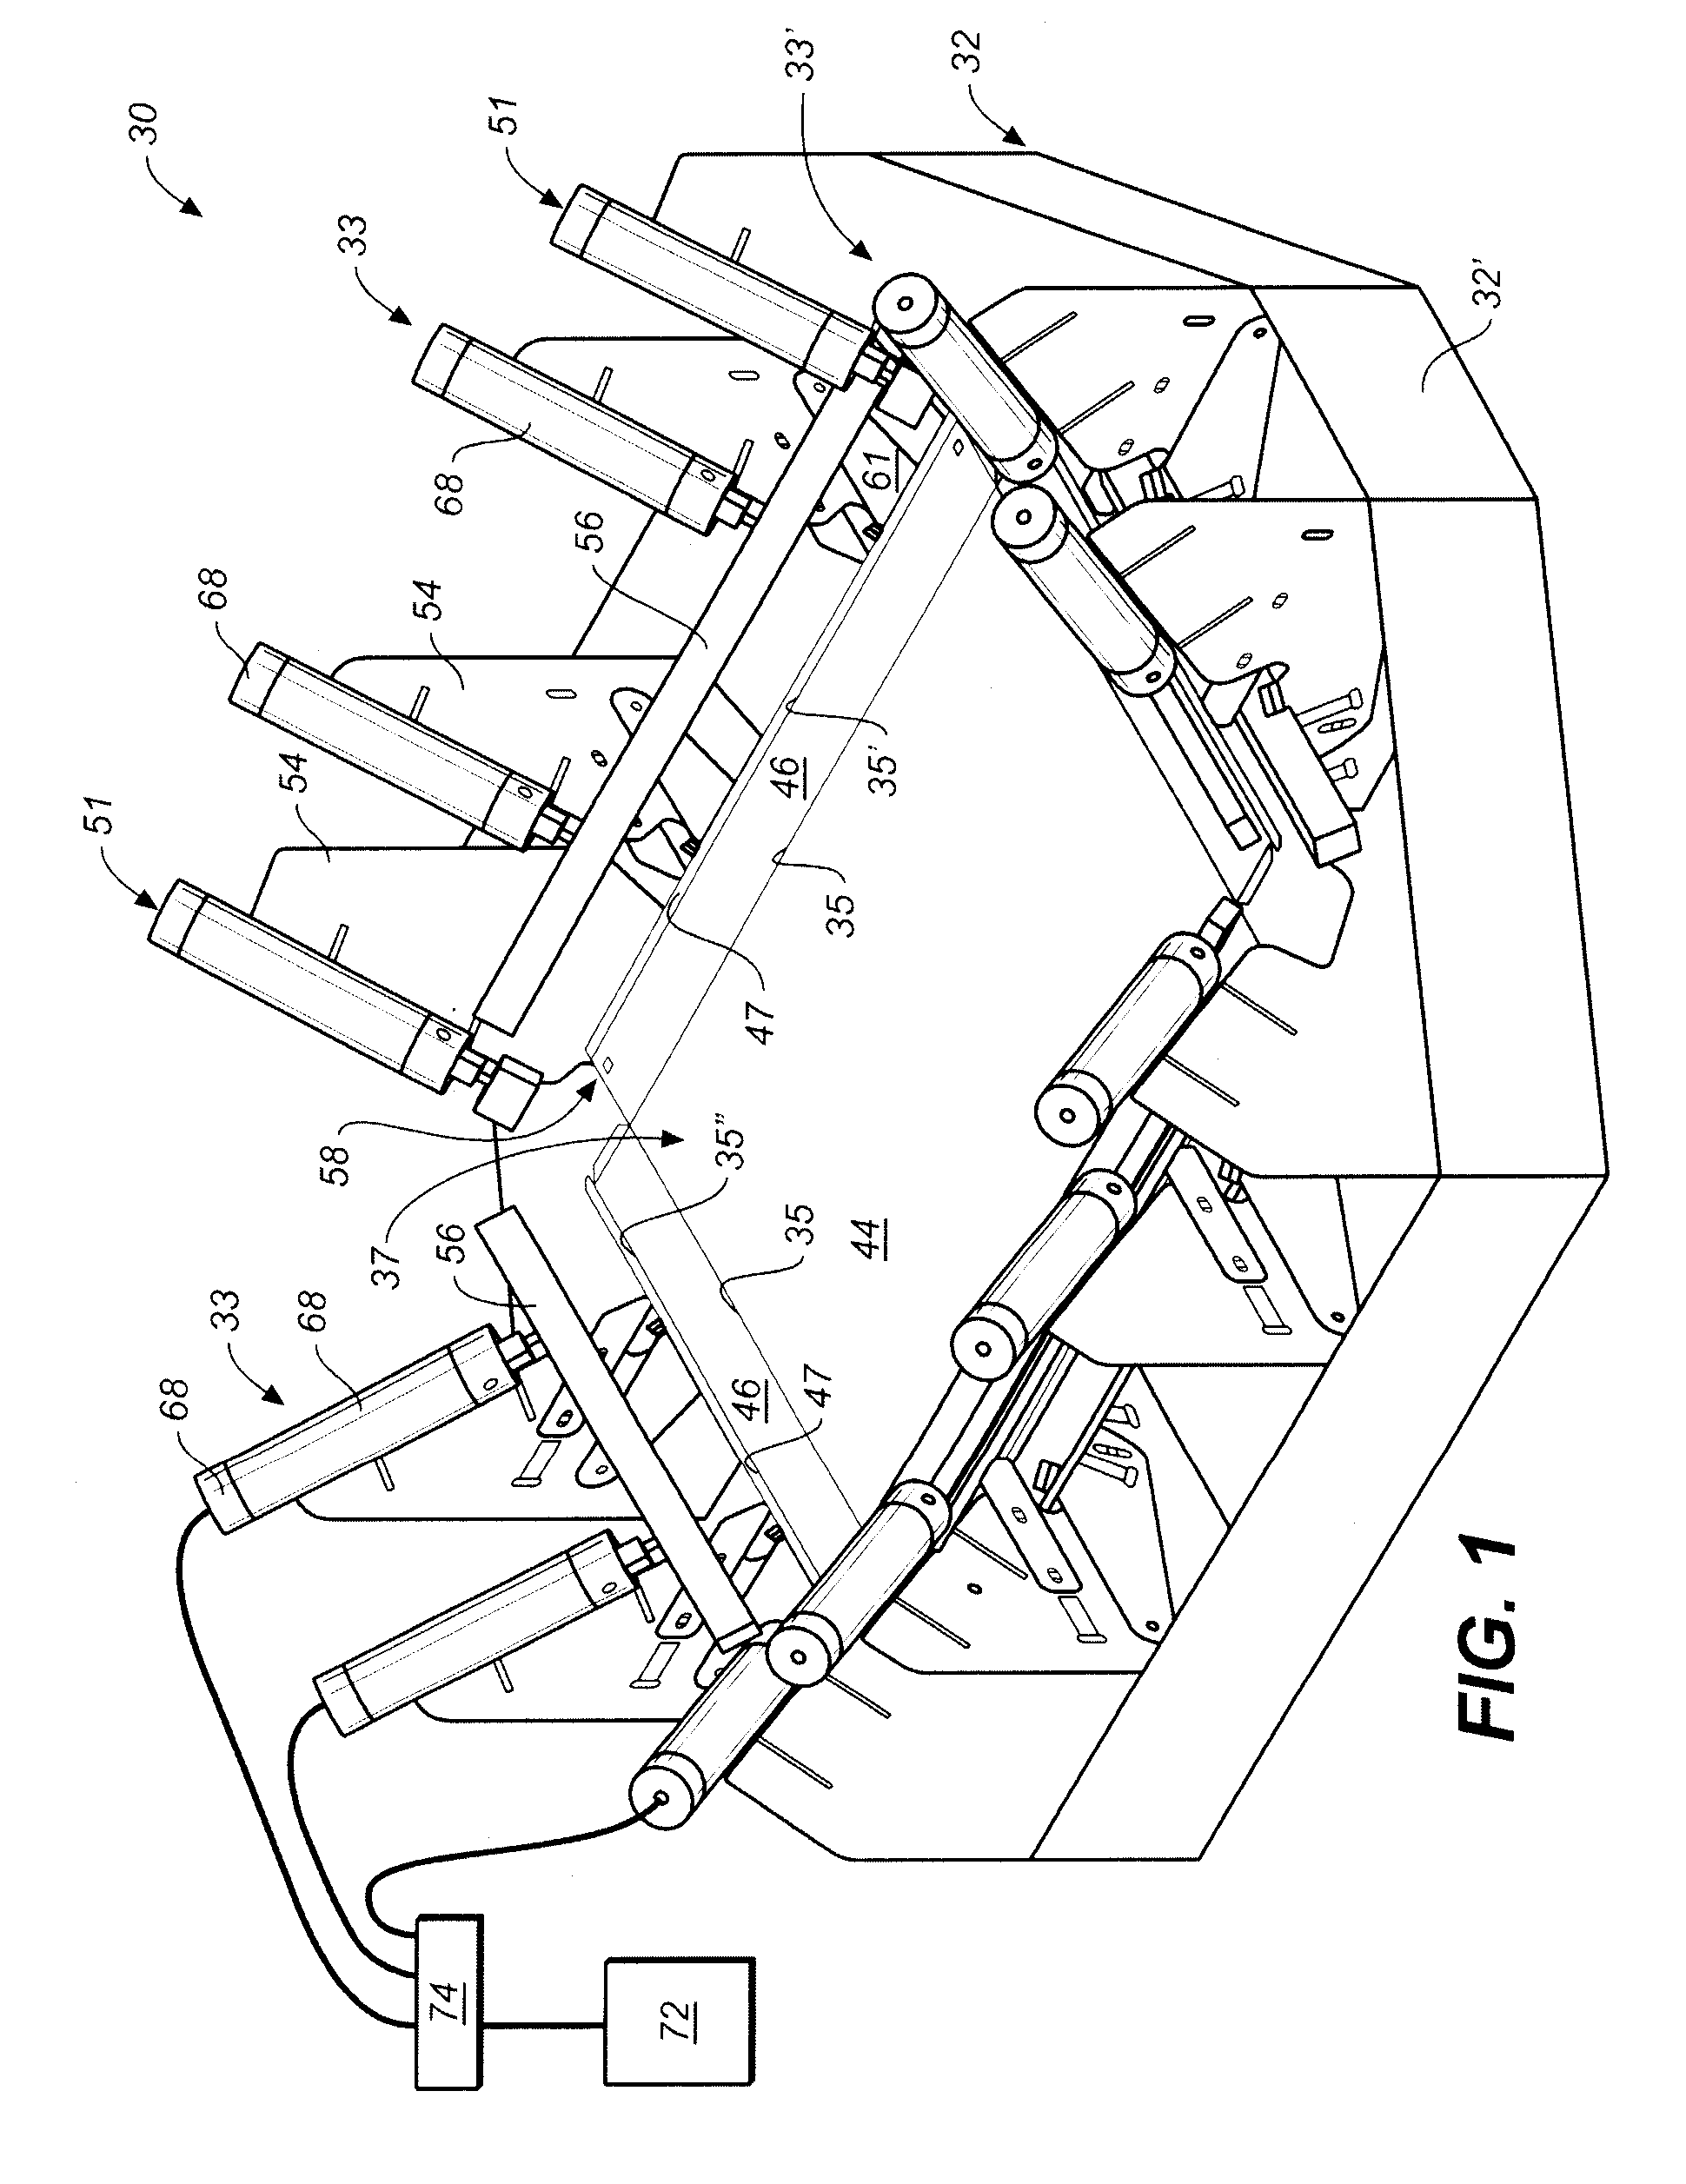 Method and Apparatus For Imparting Compound Folds on Sheet Material